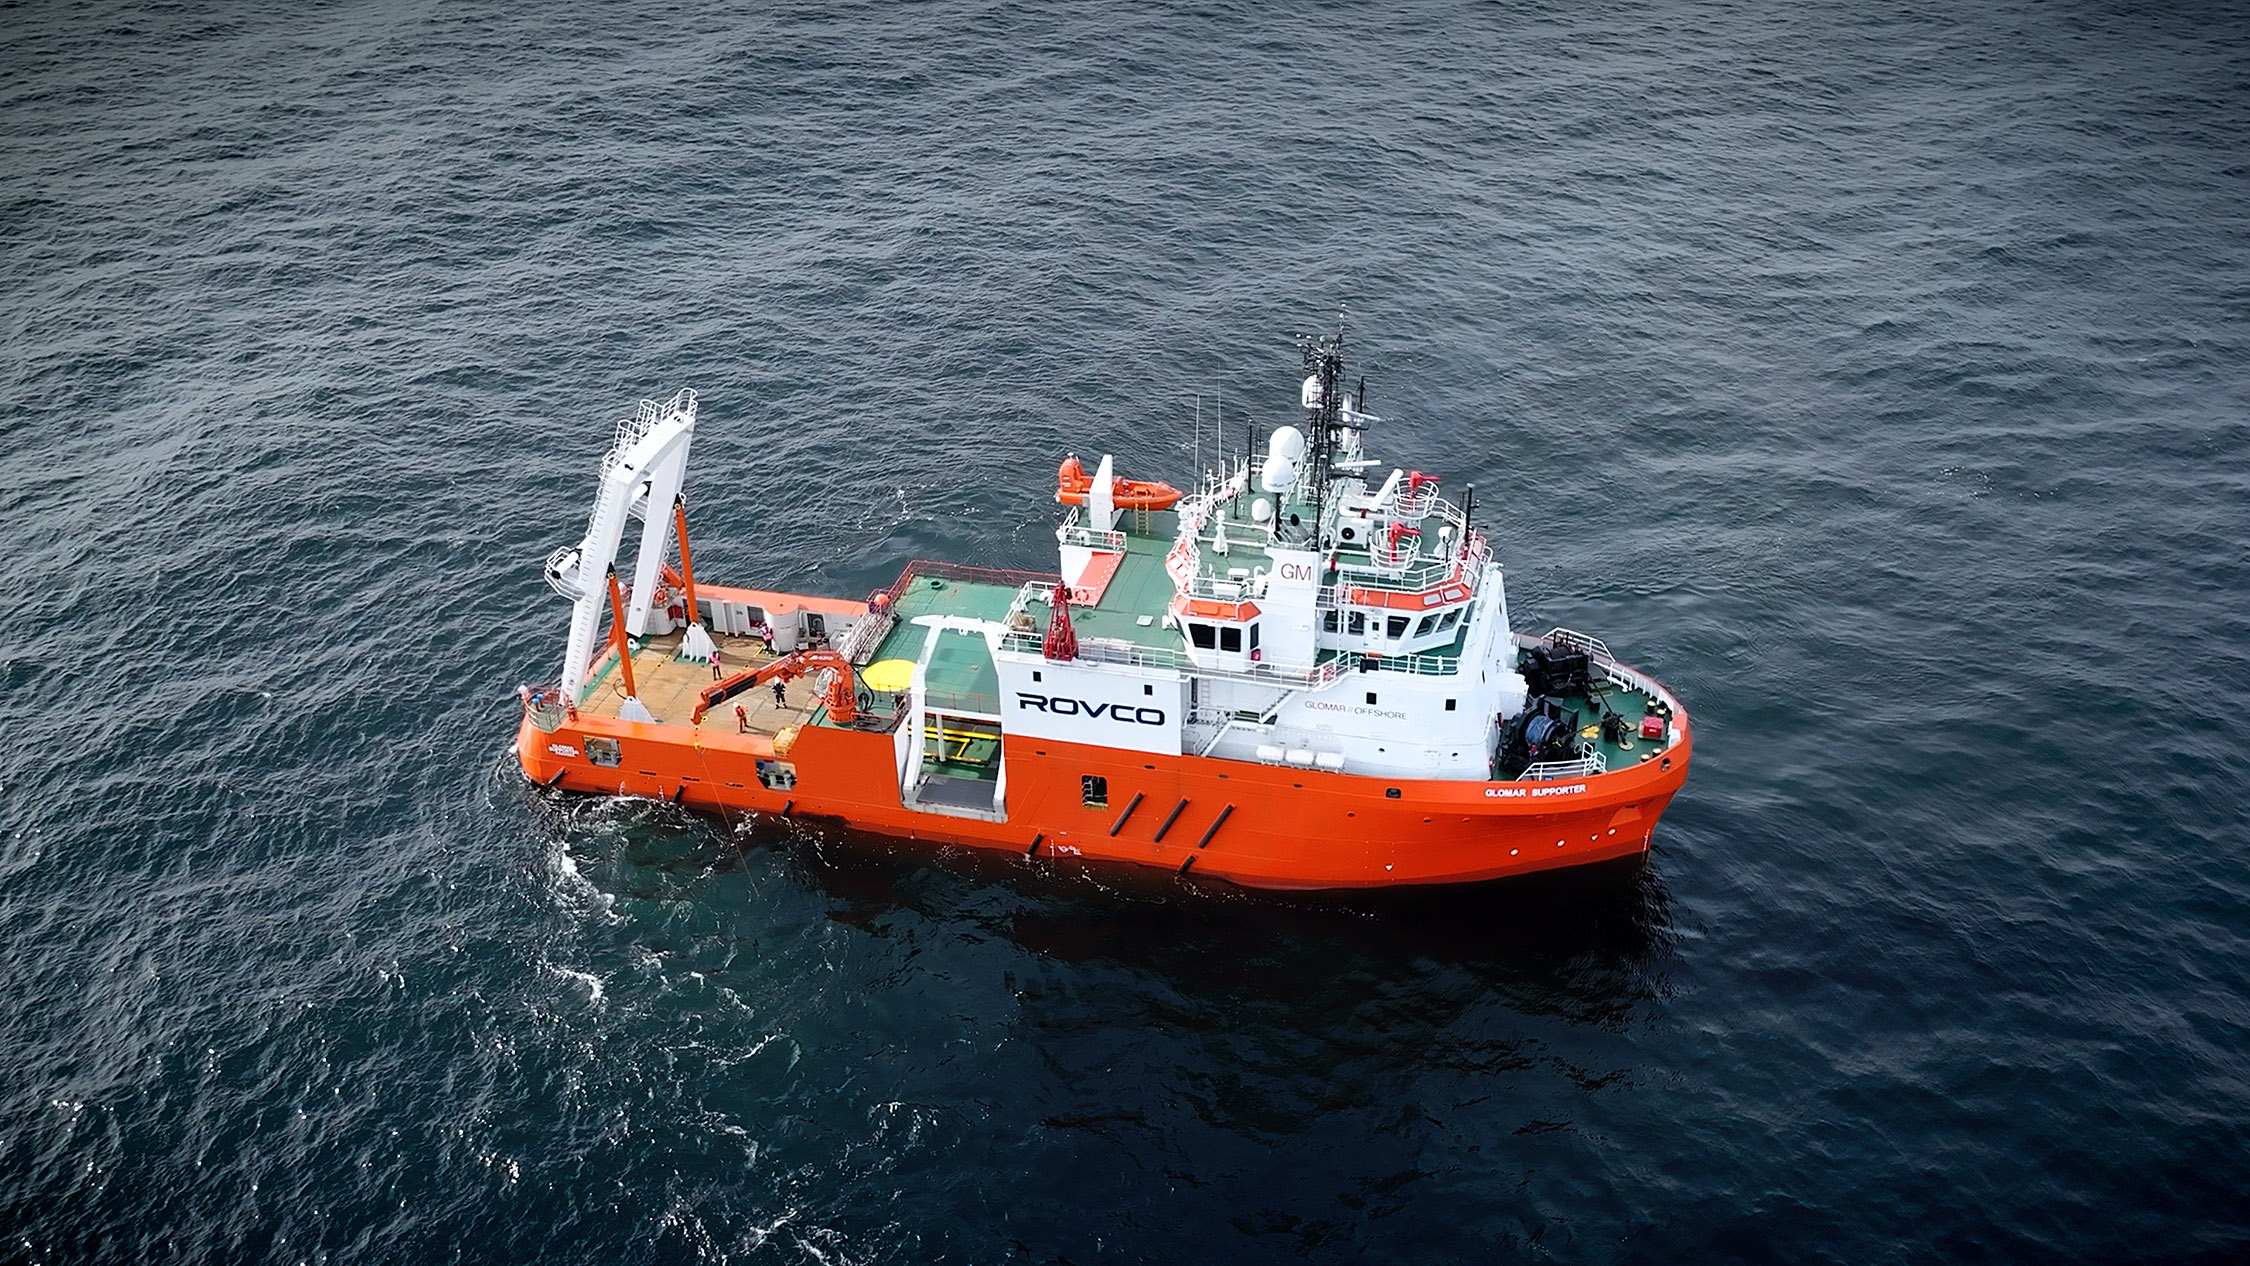 MEMBER NEWS: Rovco successfully completes fast-track survey work with Flotation Energy and Vårgrønn for the Cenos floating offshore windfarm